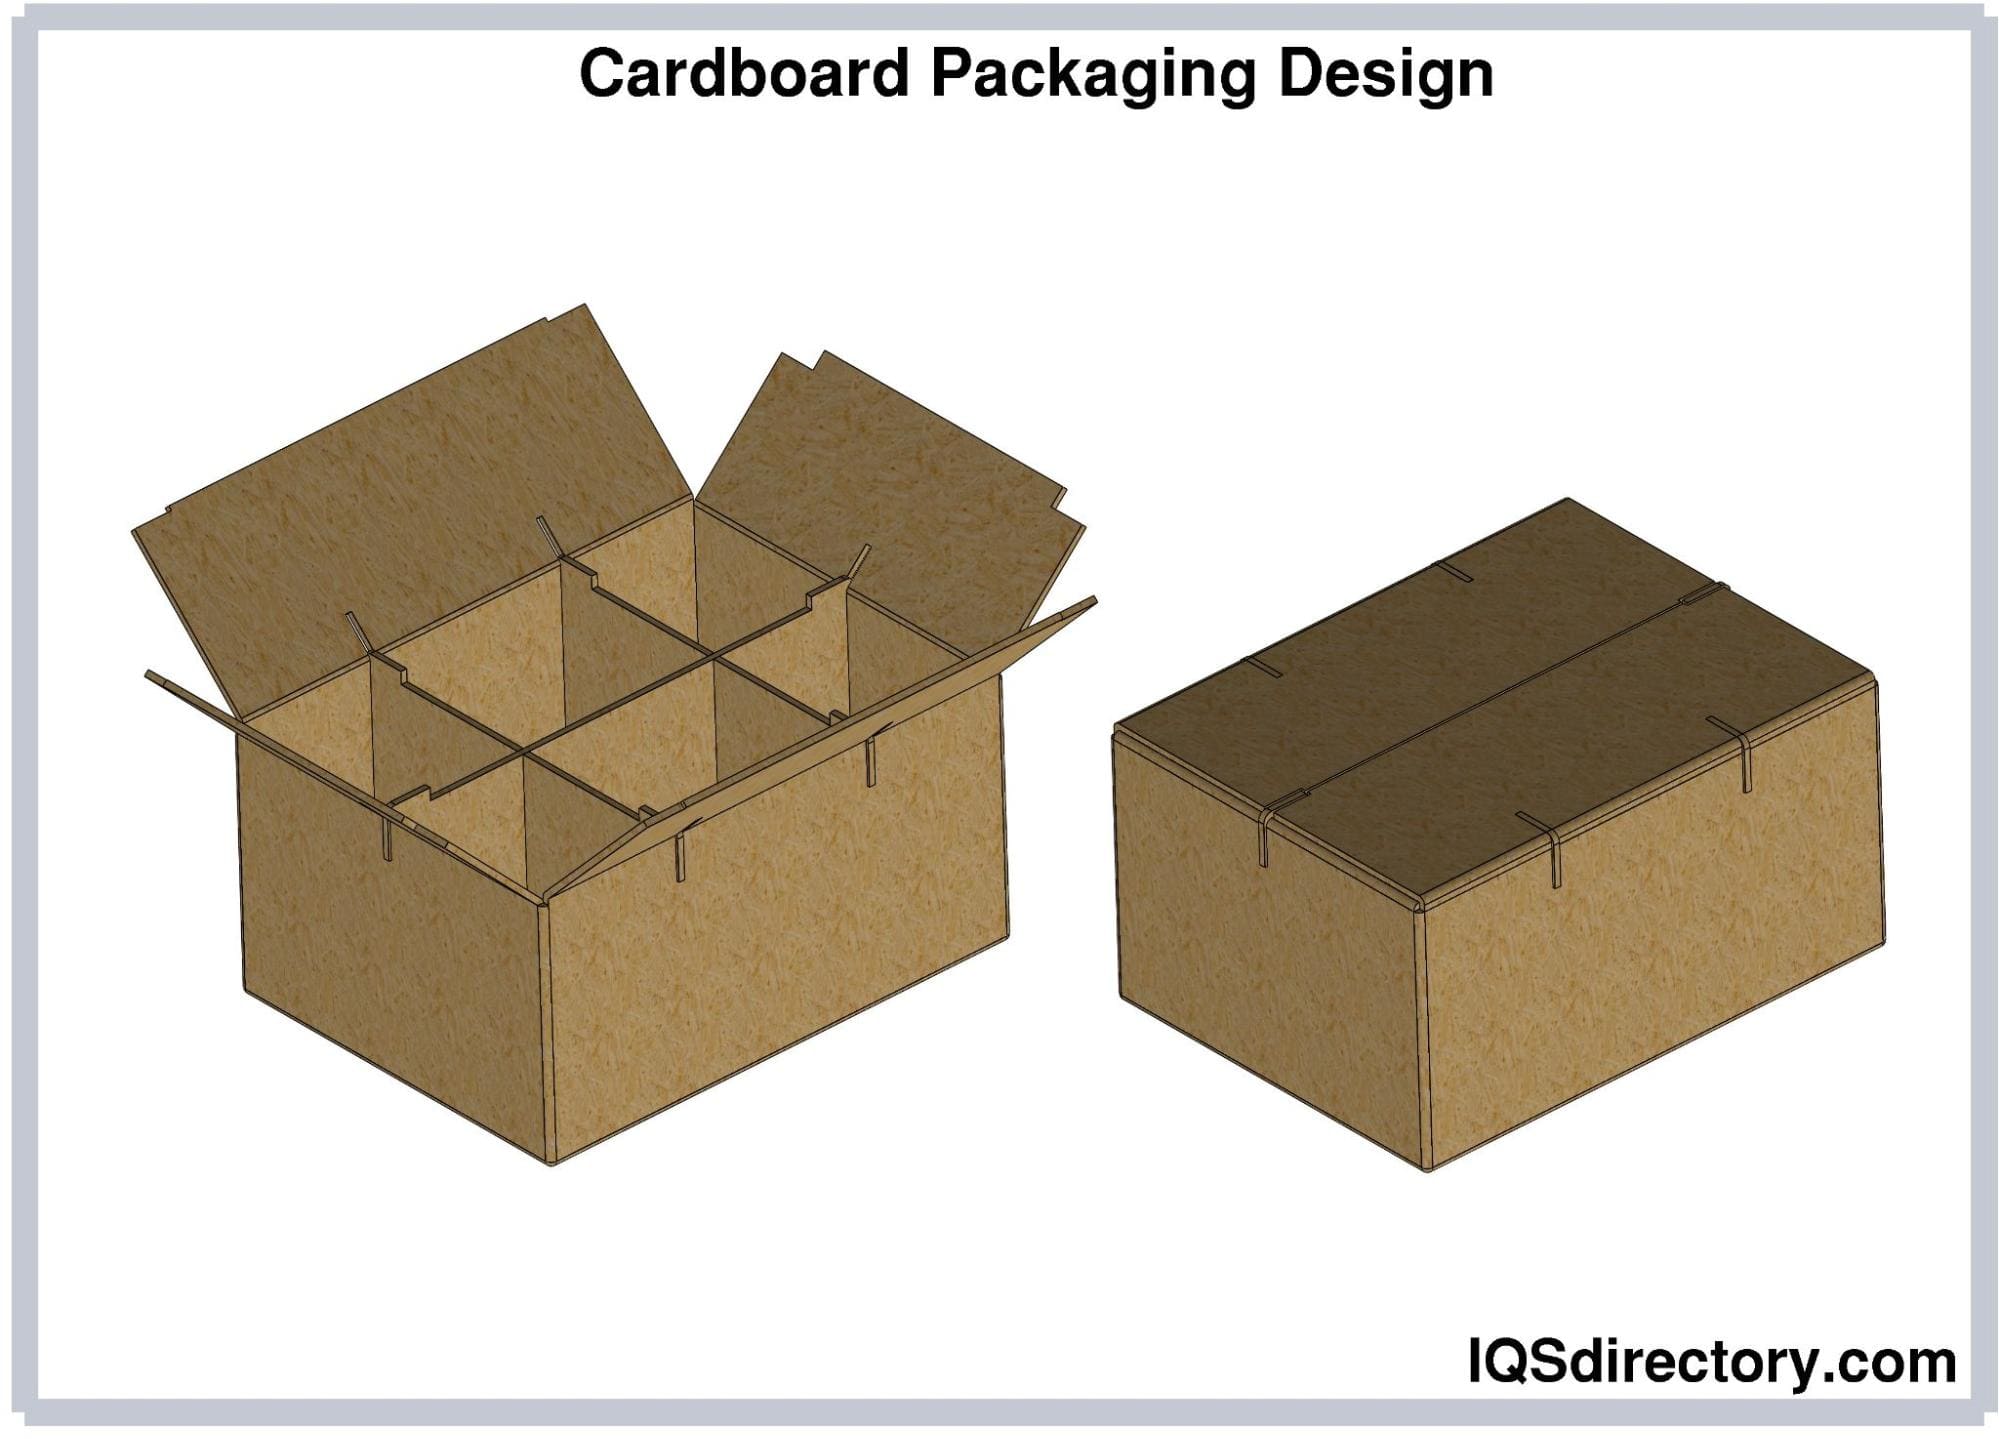 Contract Packaging Companies